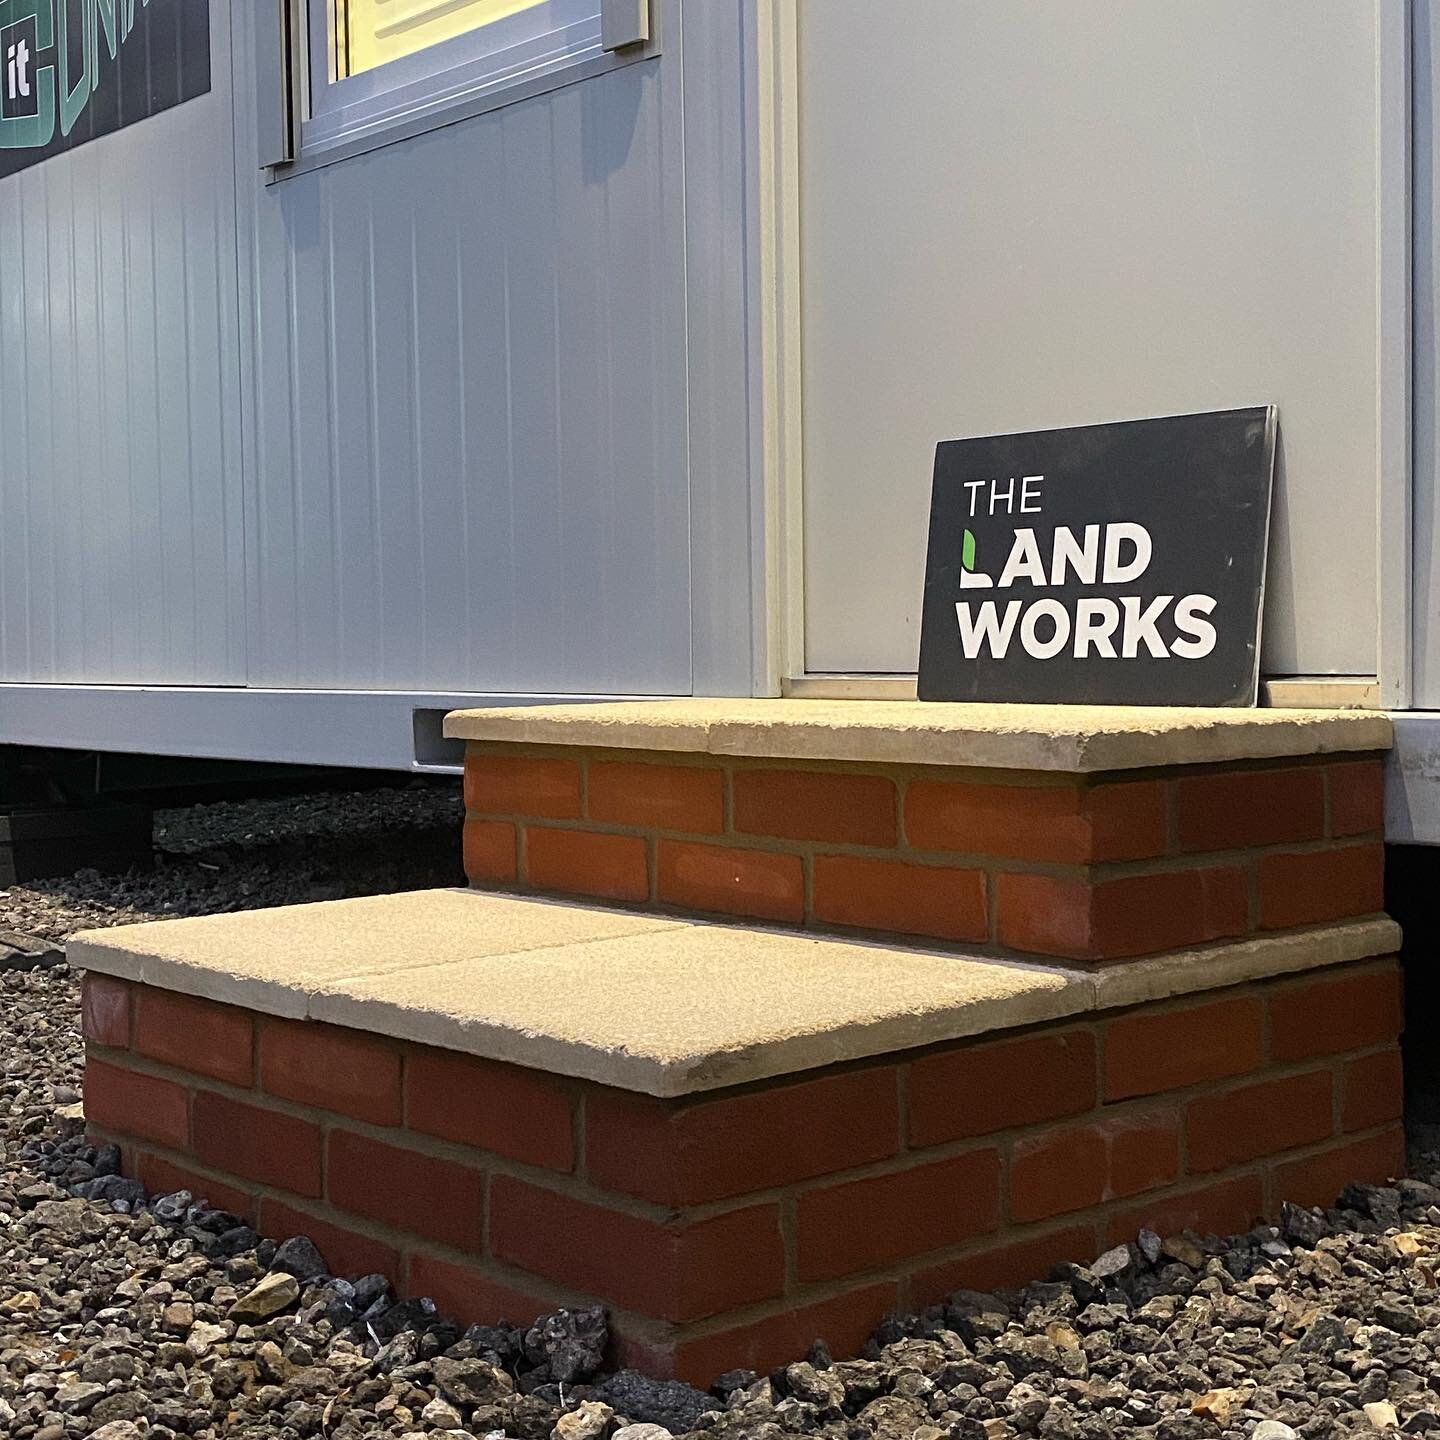 New steps in for Tom @containerit for his updated office entrance - replaced old timber for new brick work steps with 450 slabs #thelandworks #cambridge #steps #brickwork #landscapes